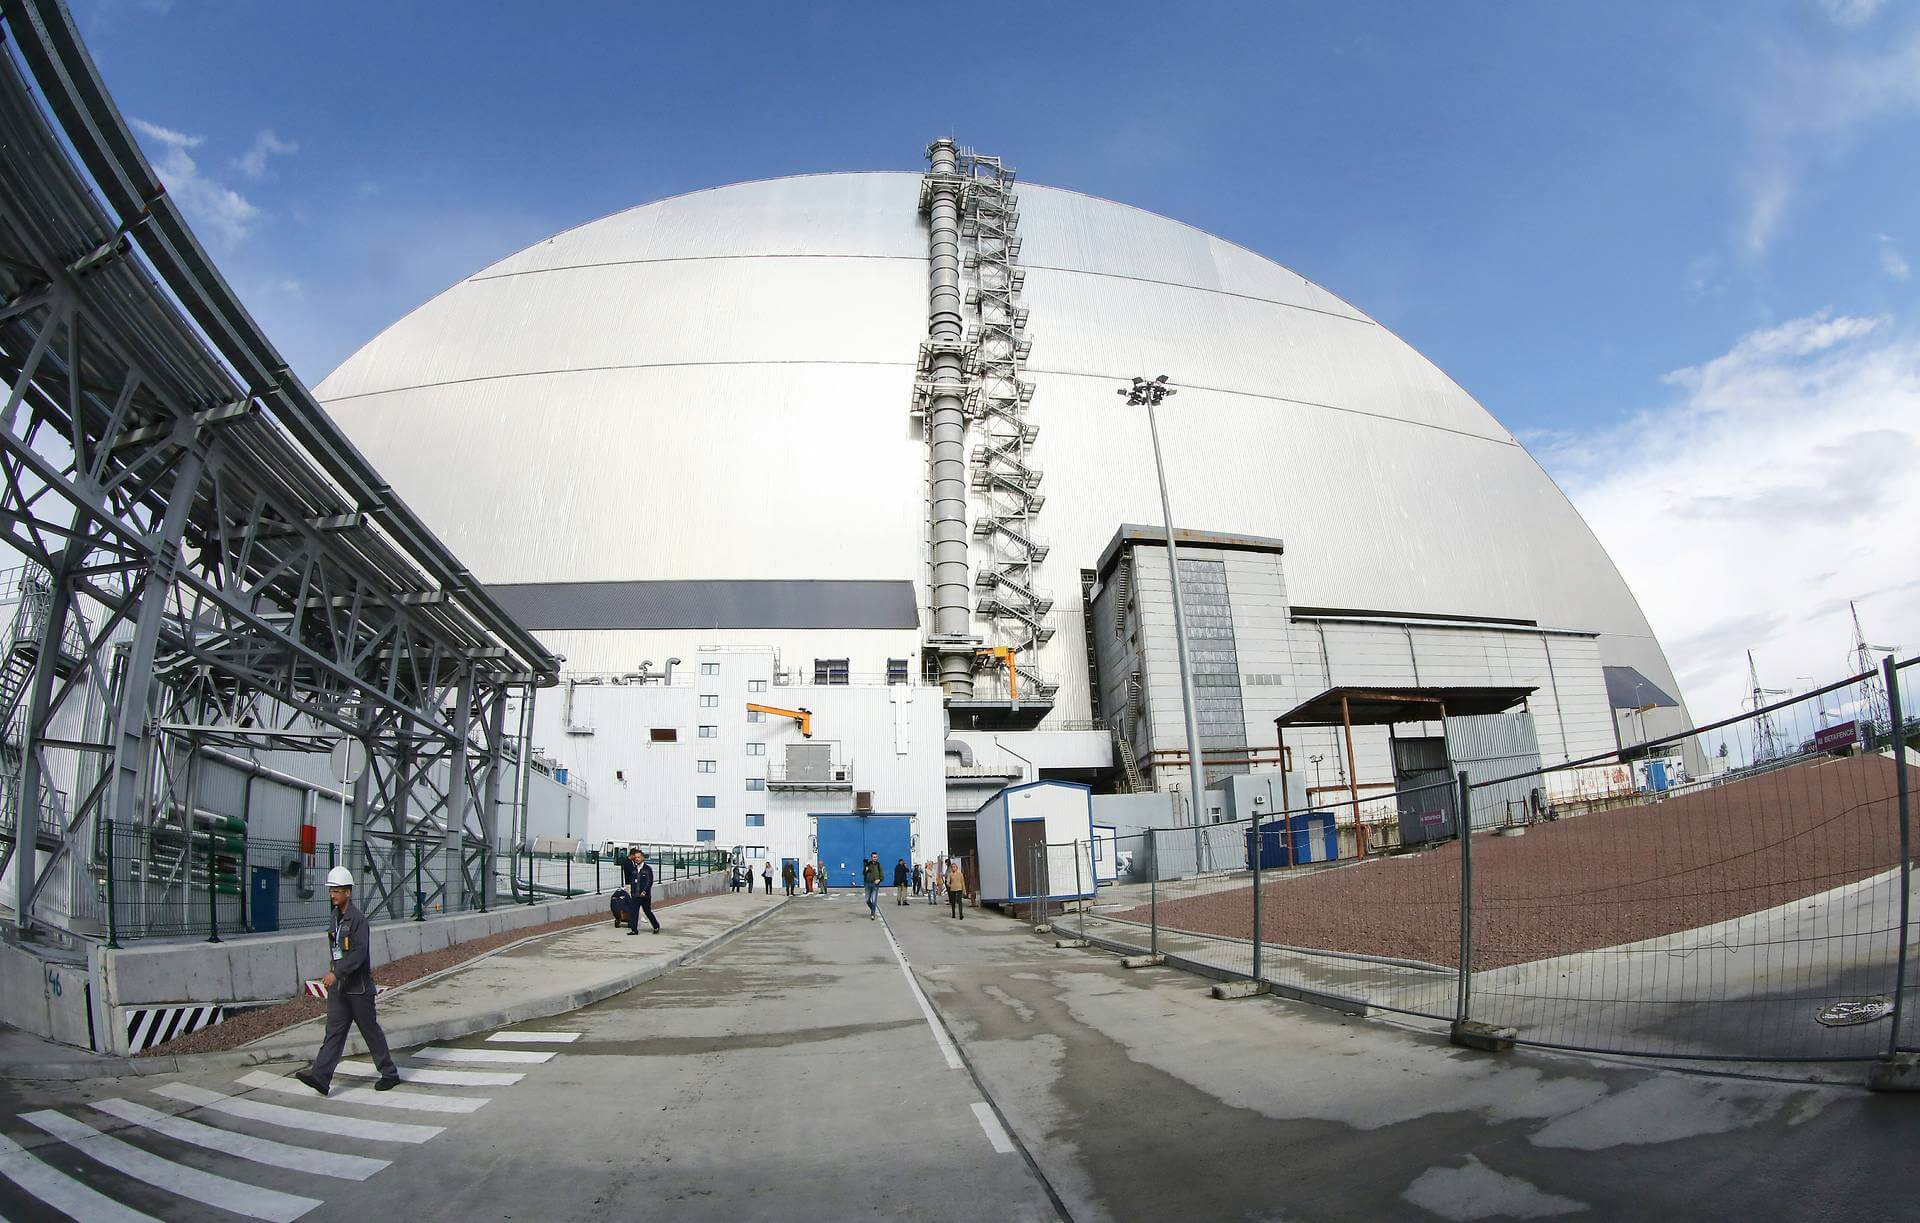 #videos | Inside the new sarcophagus of the Chernobyl nuclear power plant worth 1.5 billion euros